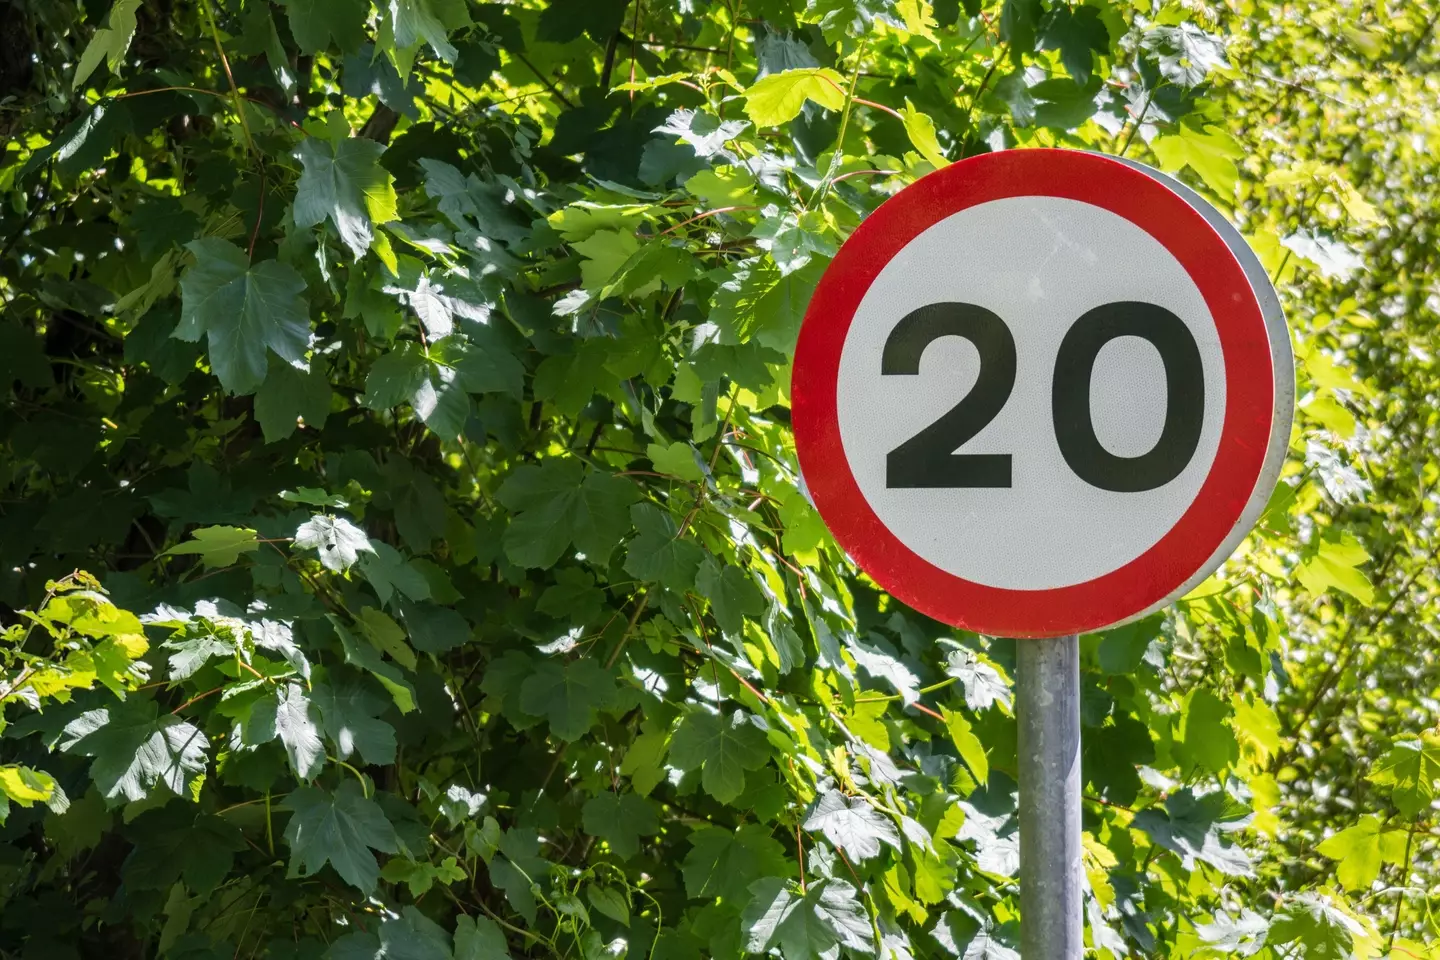 The speed limit is expected to be lowered to 20 miles per hour in some parts of the UK.